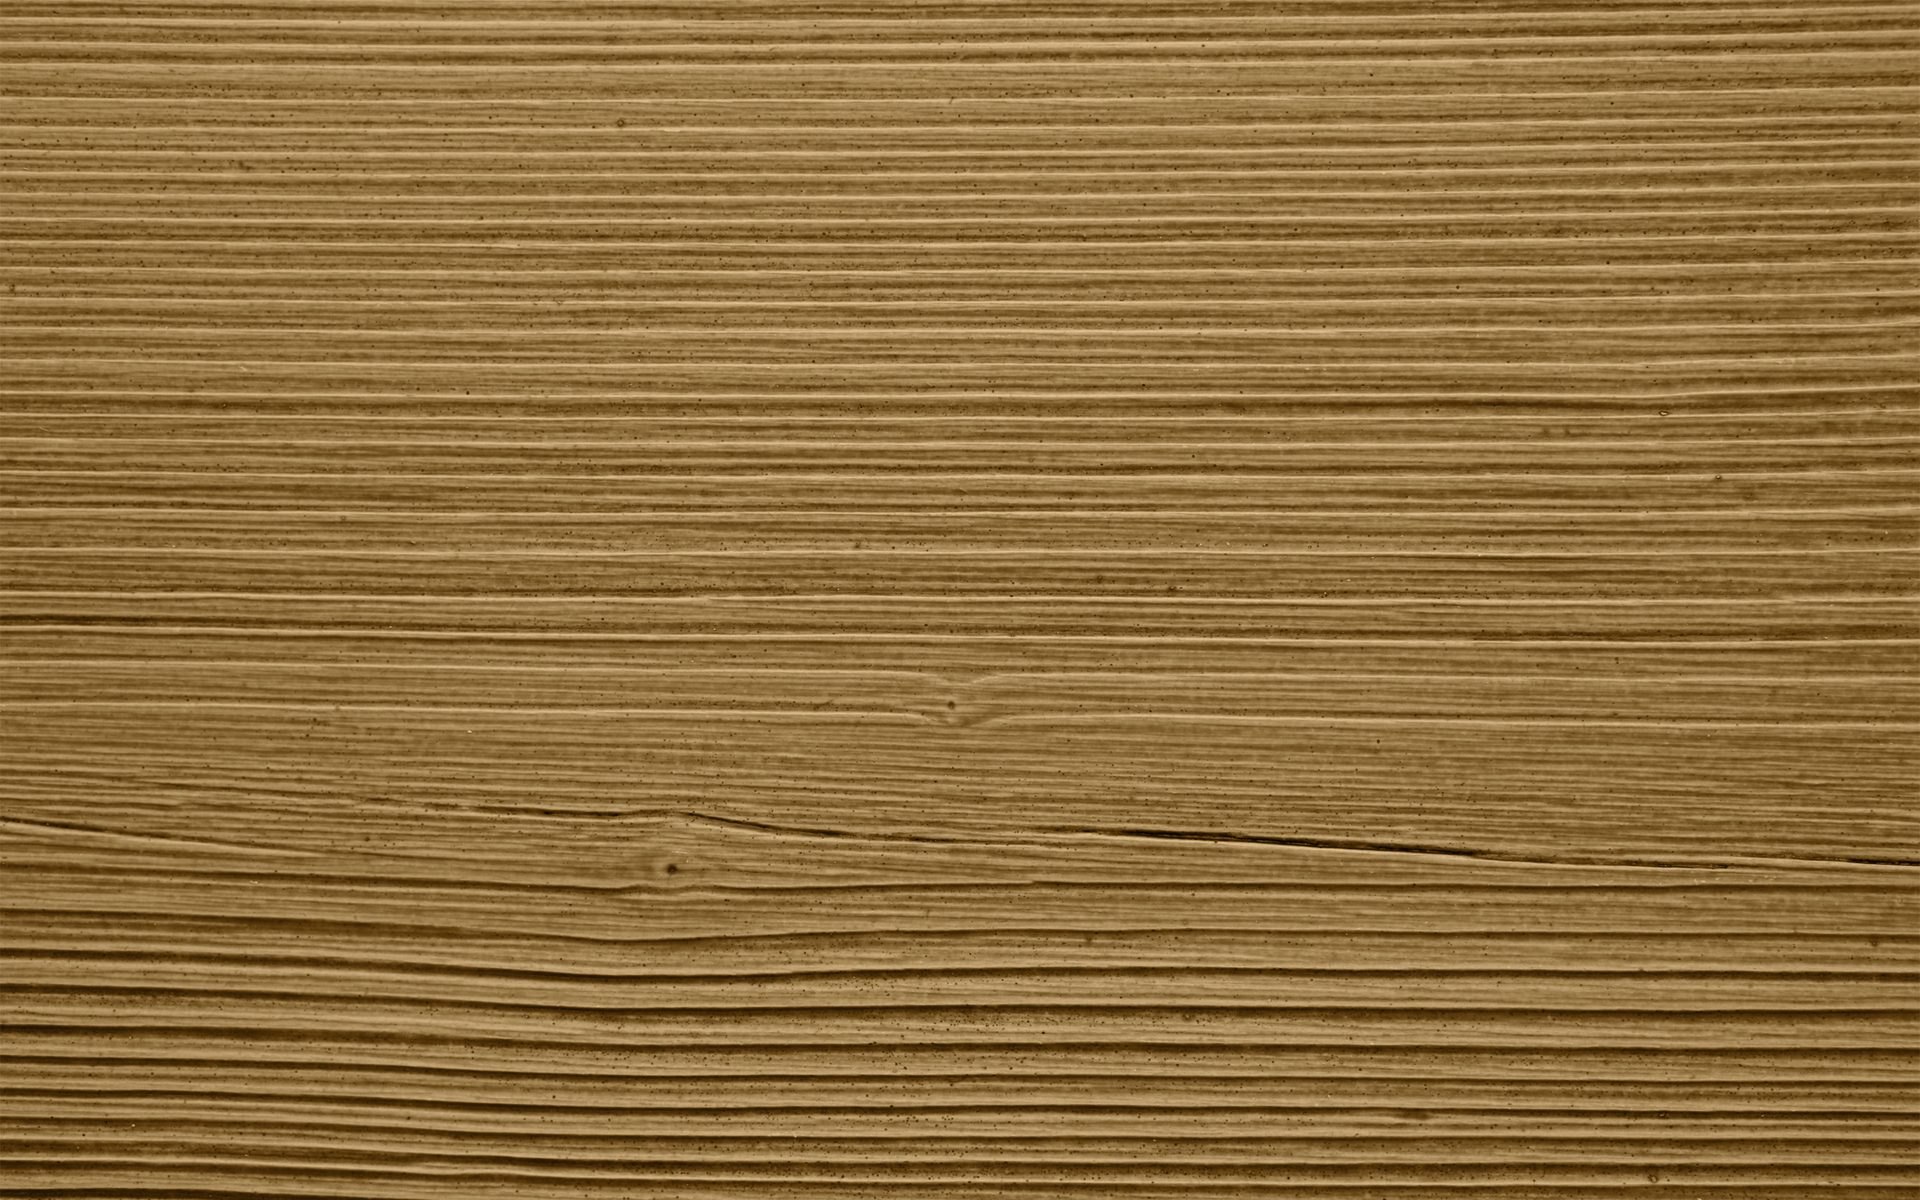 swatch of StoCast wood product called Beach